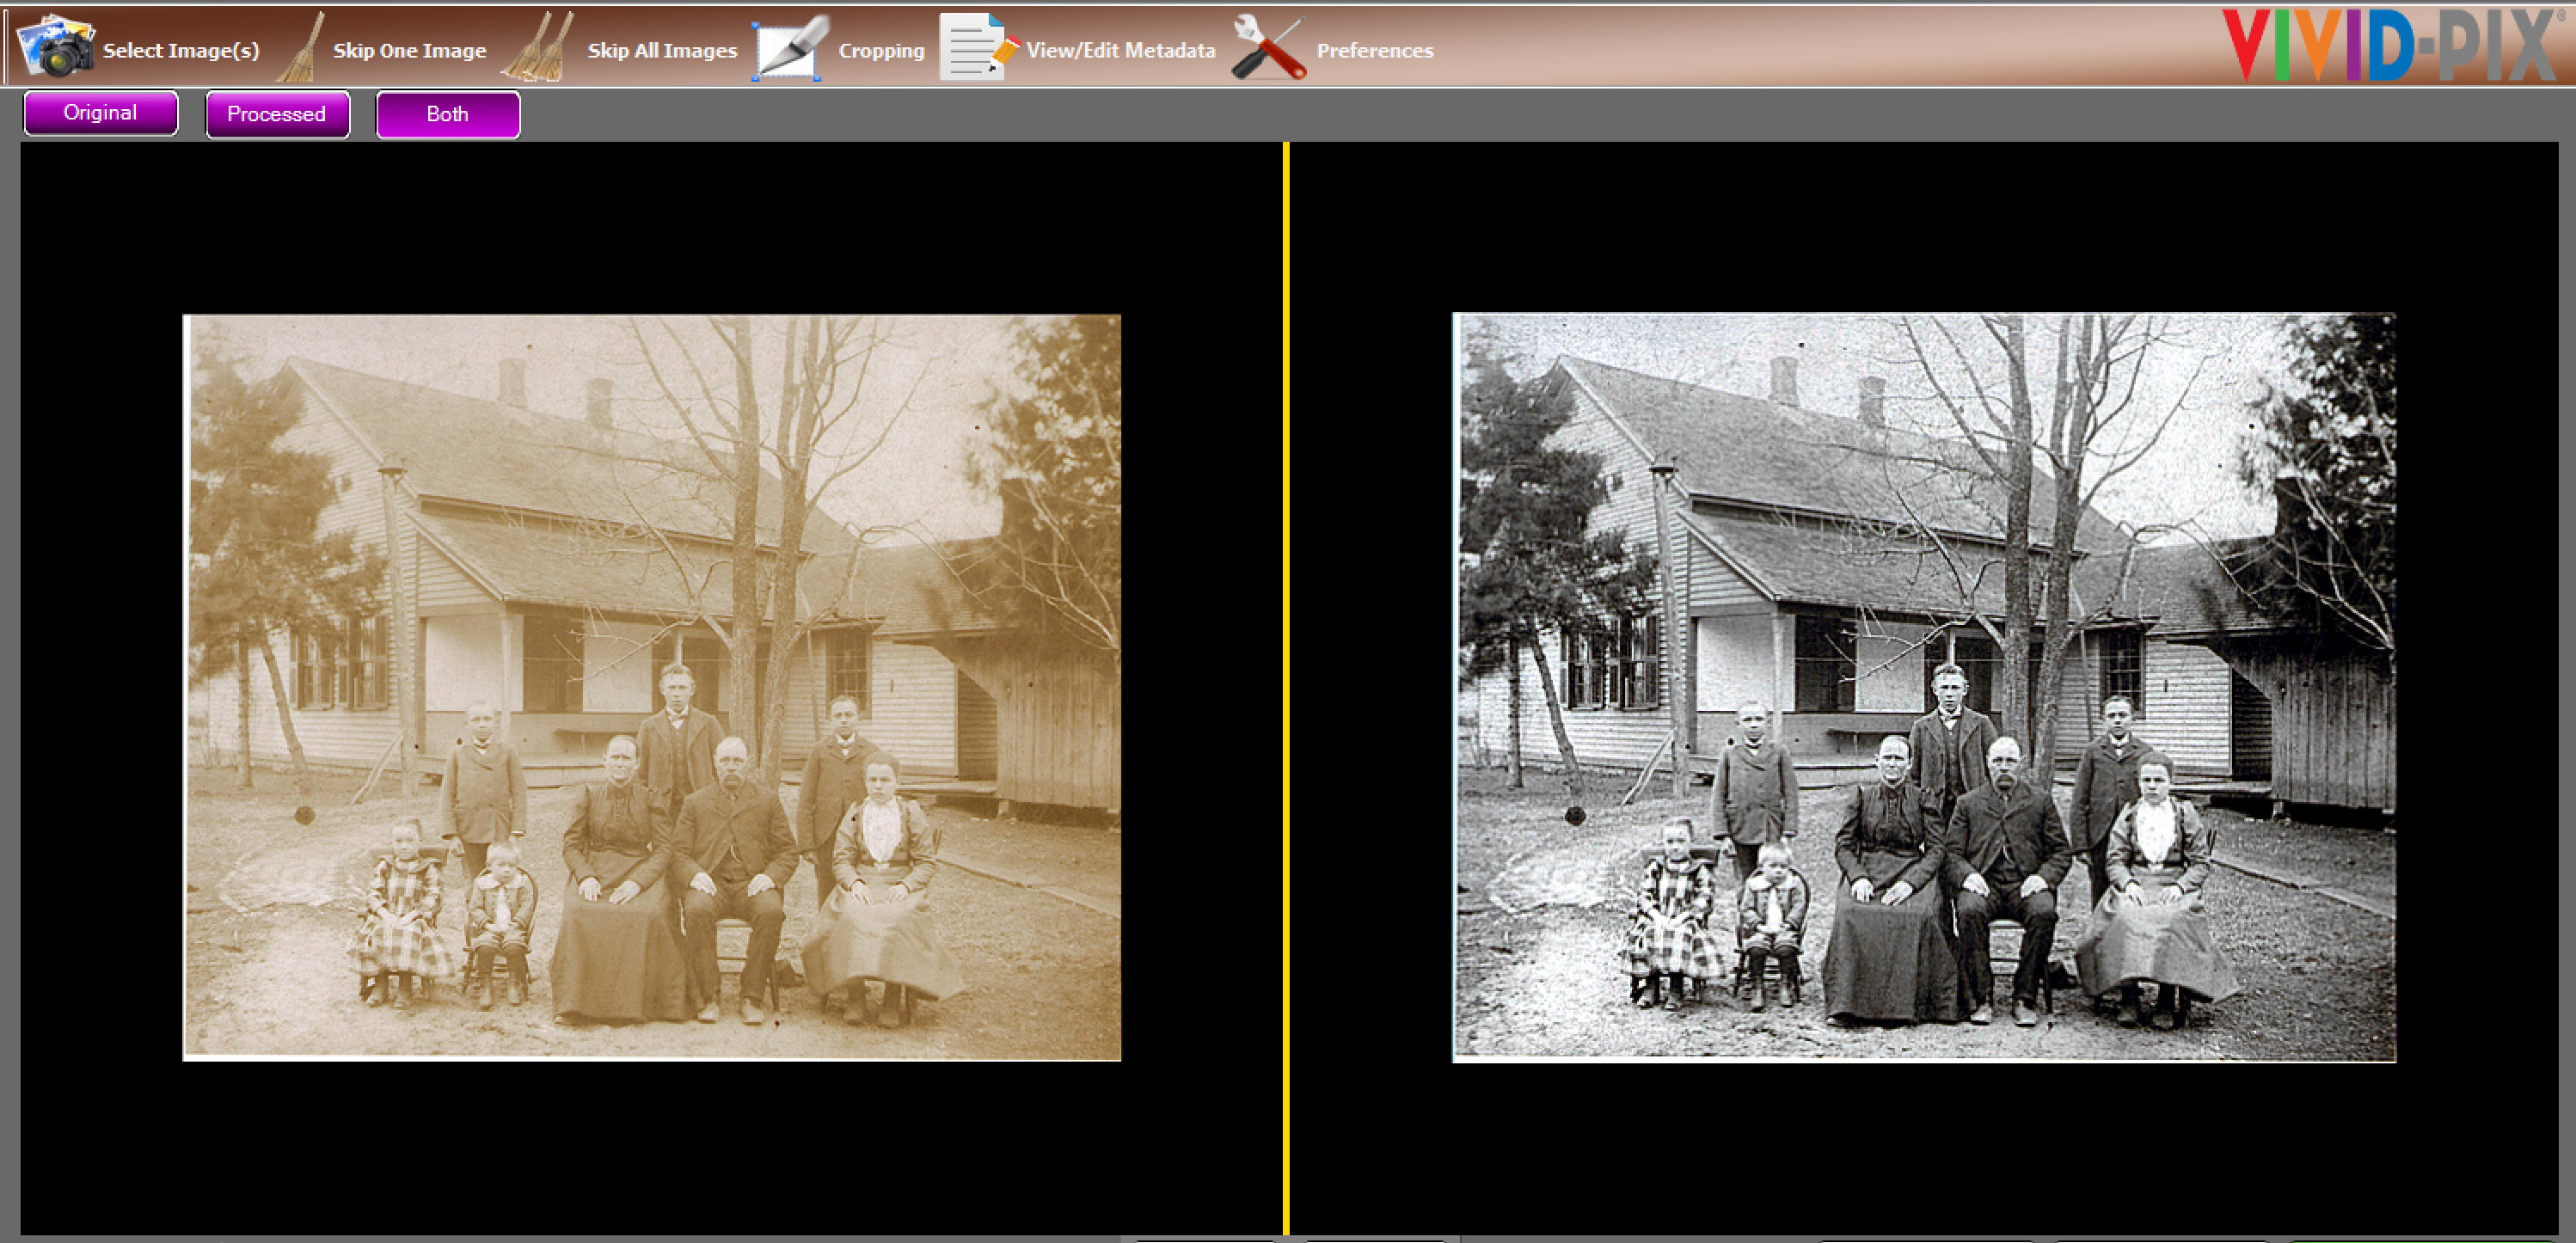 Vivid-Pix Family Photo - Before & After Restored